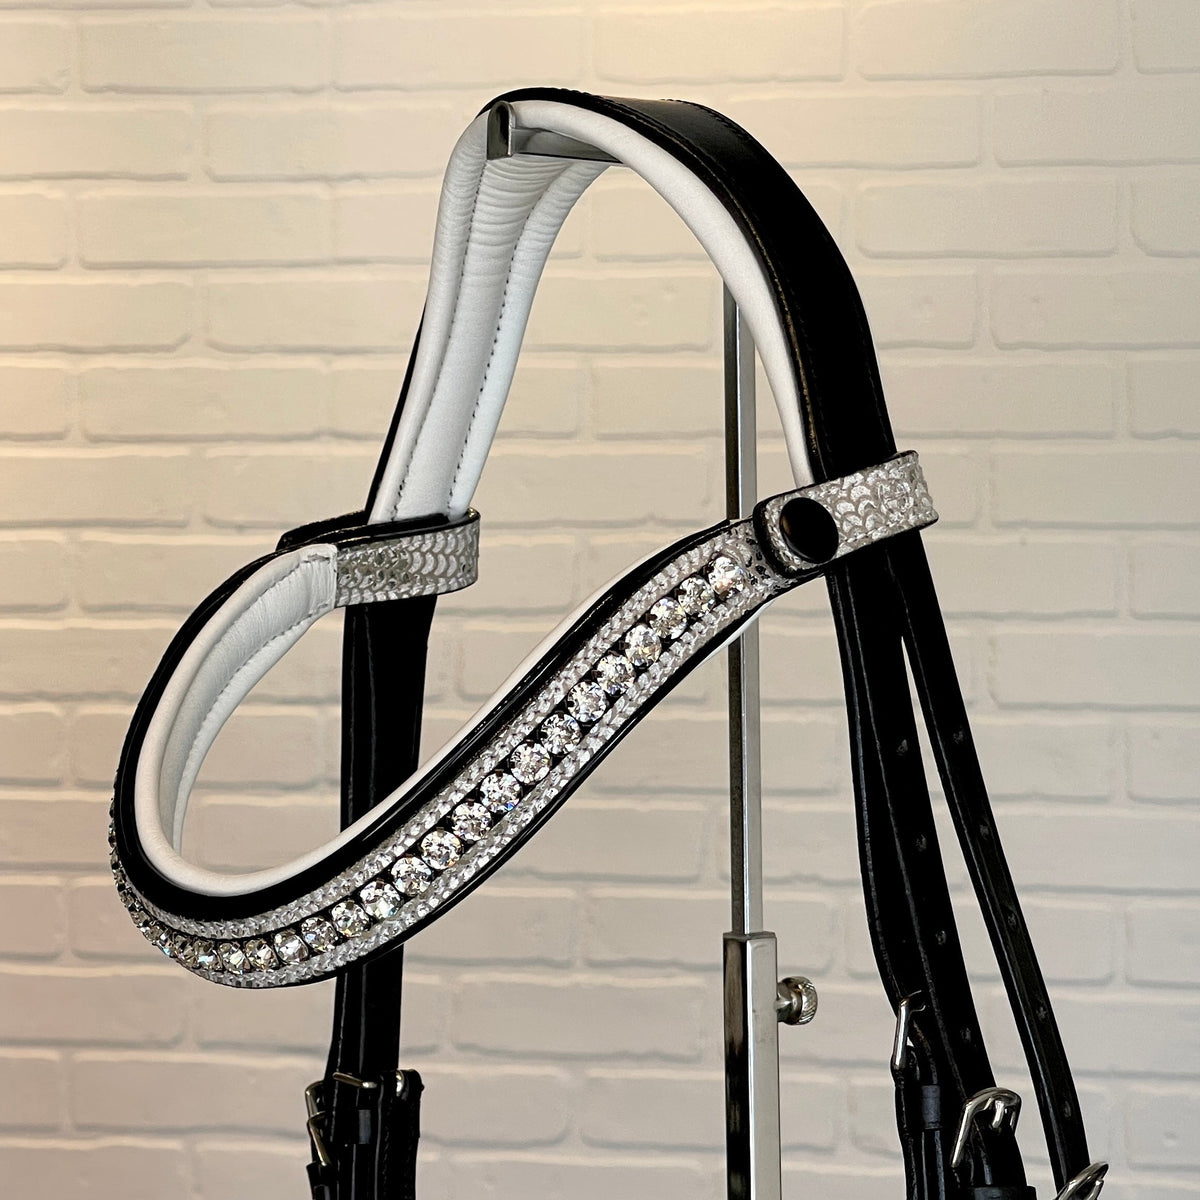 The Deco Anatomical Snaffle Bridle